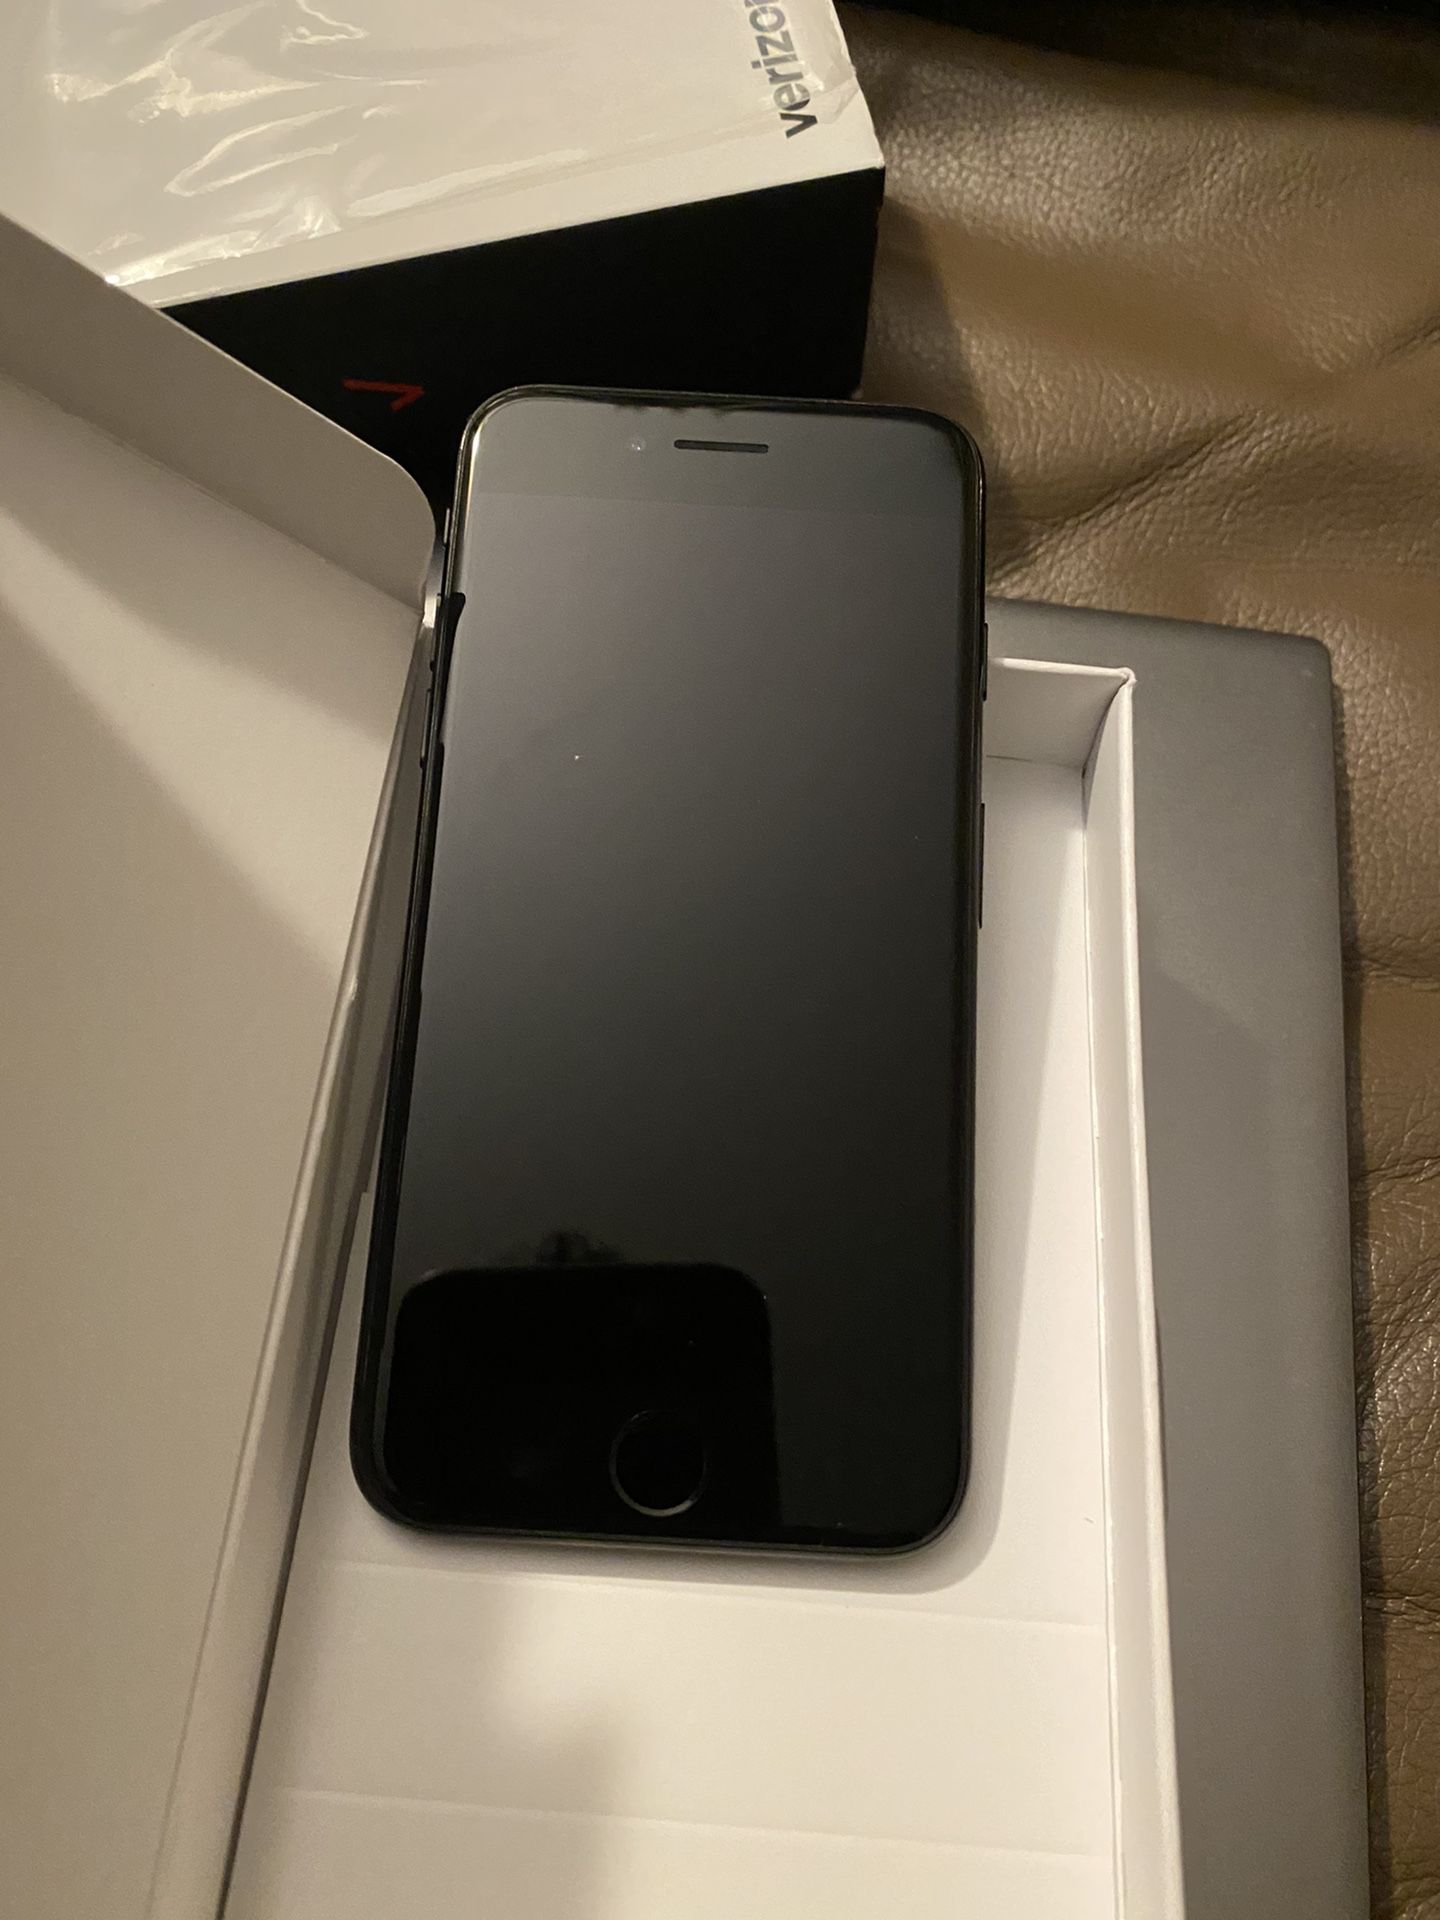 IPHONE 7 256GB Factory Unlocked Any Carrier